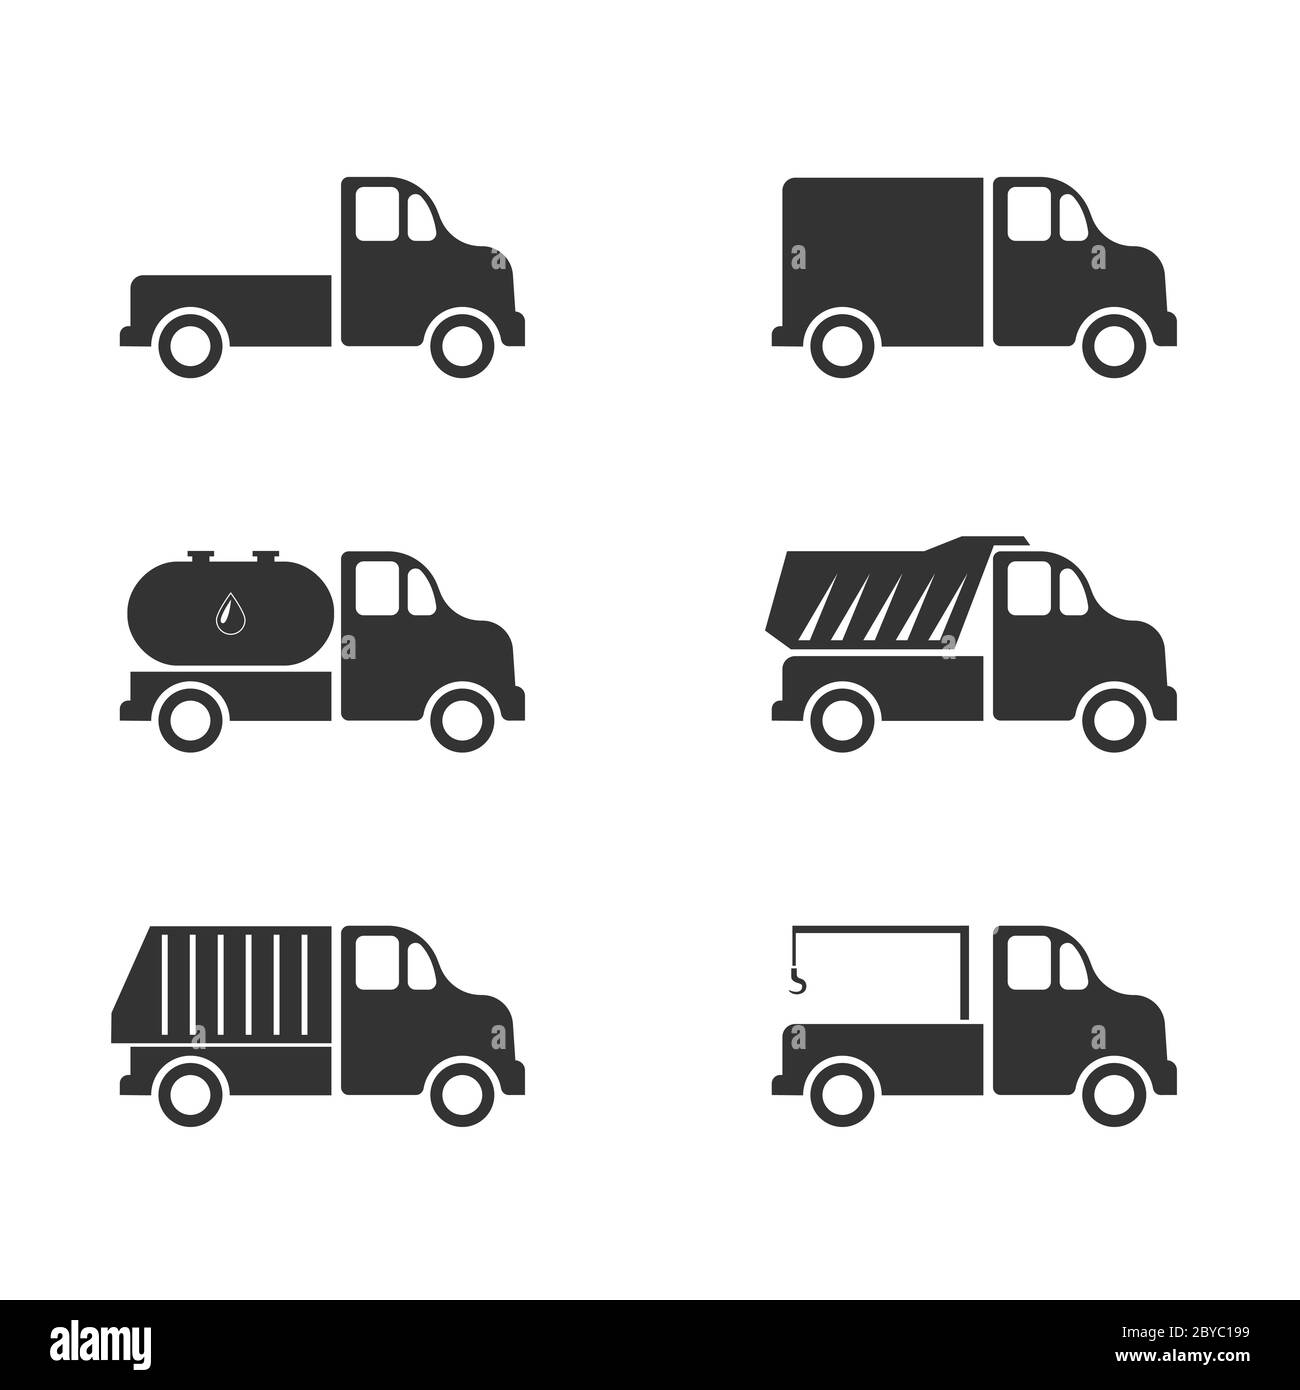 Tow track vector icons Stock Vector